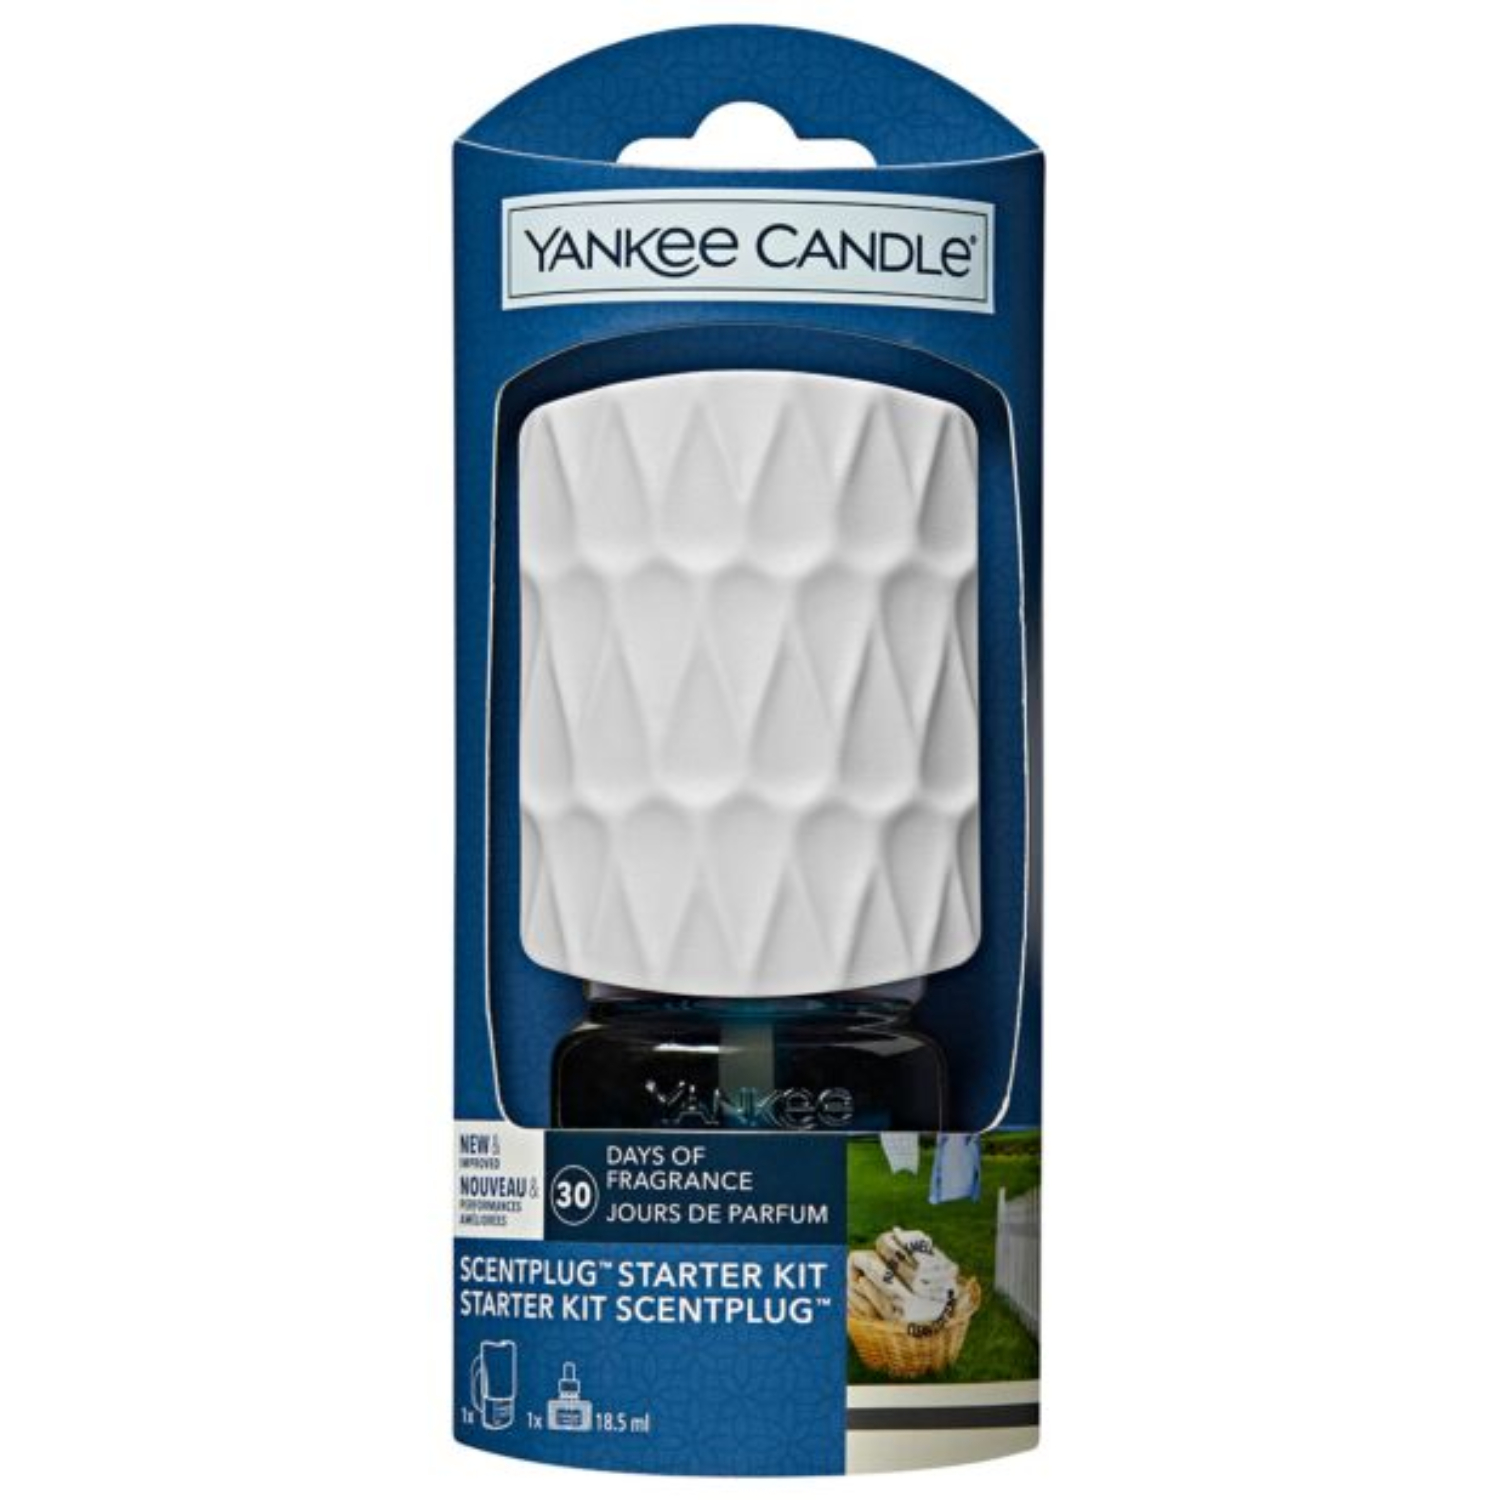 Yankee Candle ScentPlug Starter Kit in Clean Cotton